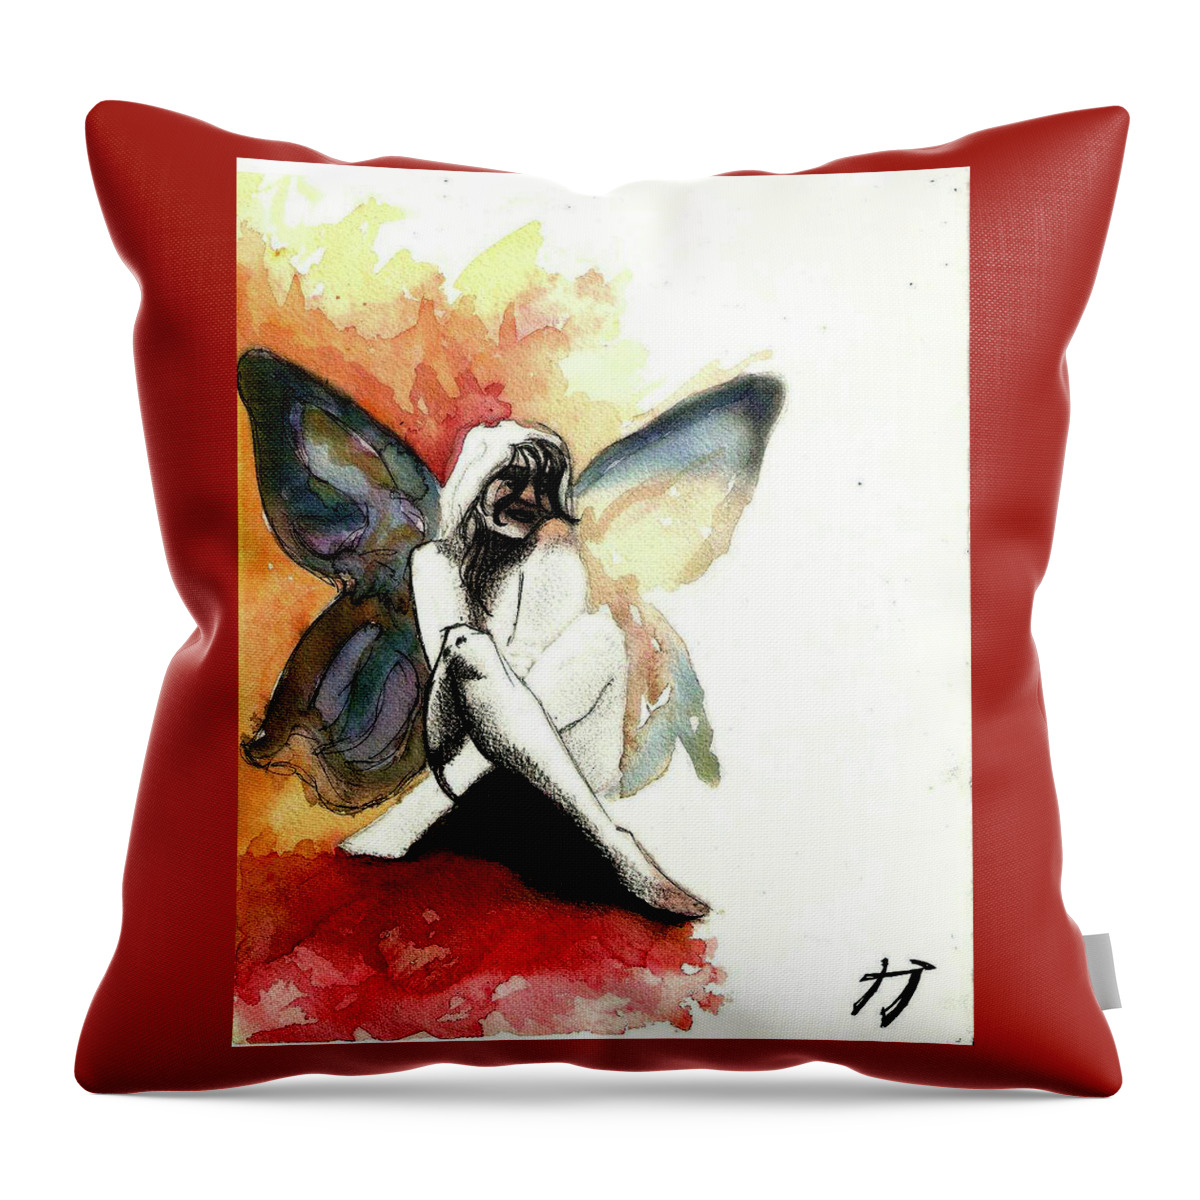 Wall Art Throw Pillow featuring the painting Butter Dreams by Carlos Paredes Grogan